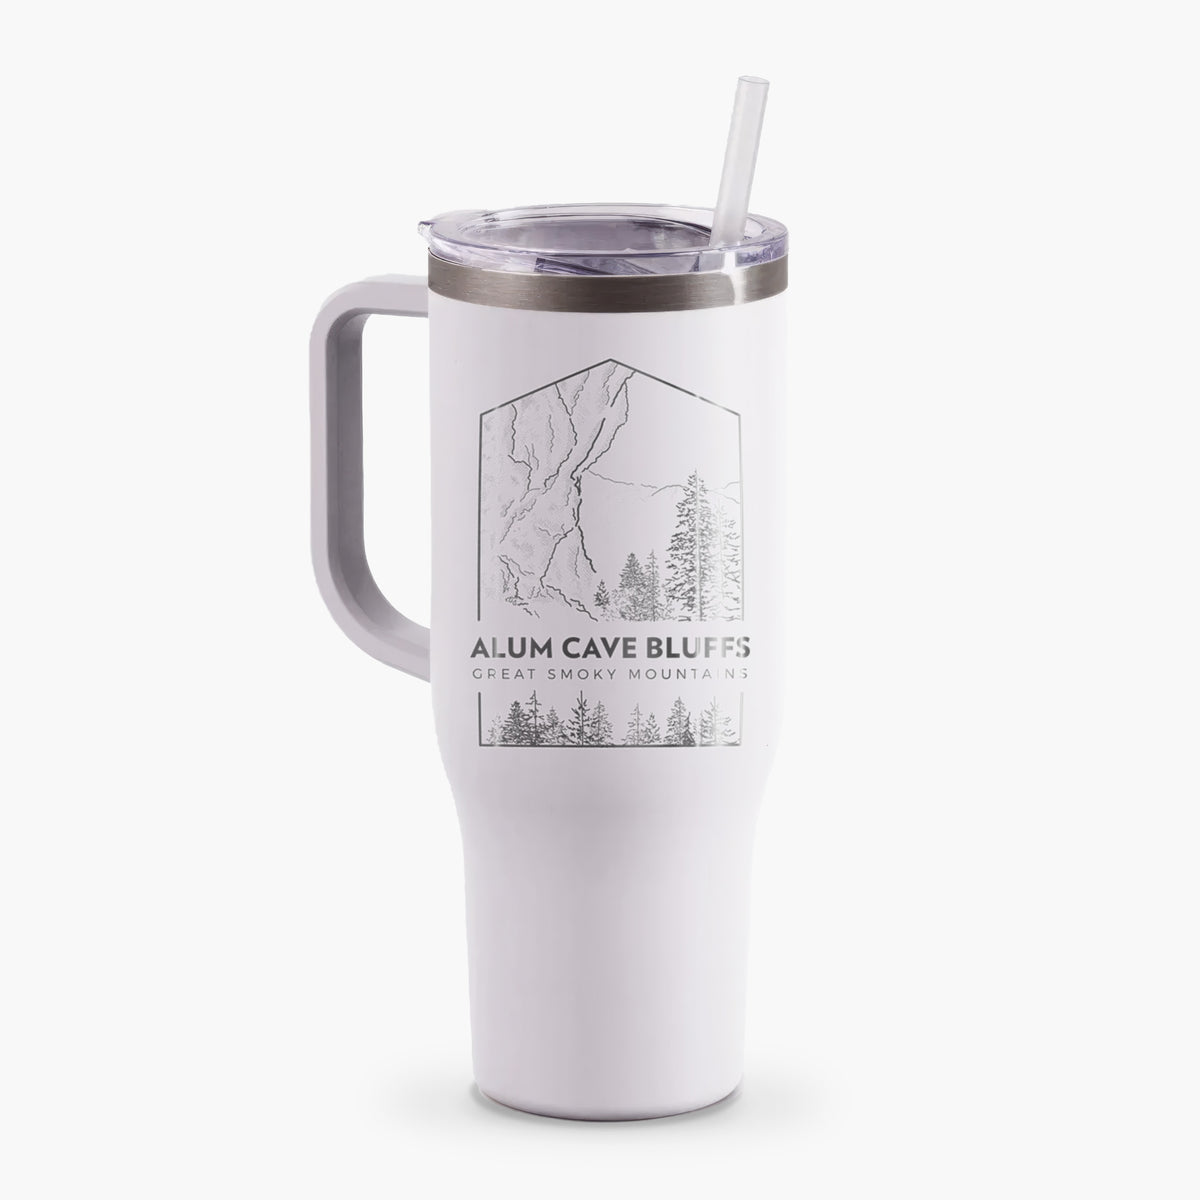 Alum Cave Bluffs - Great Smoky Mountains National Park - 40oz Tumbler with Handle